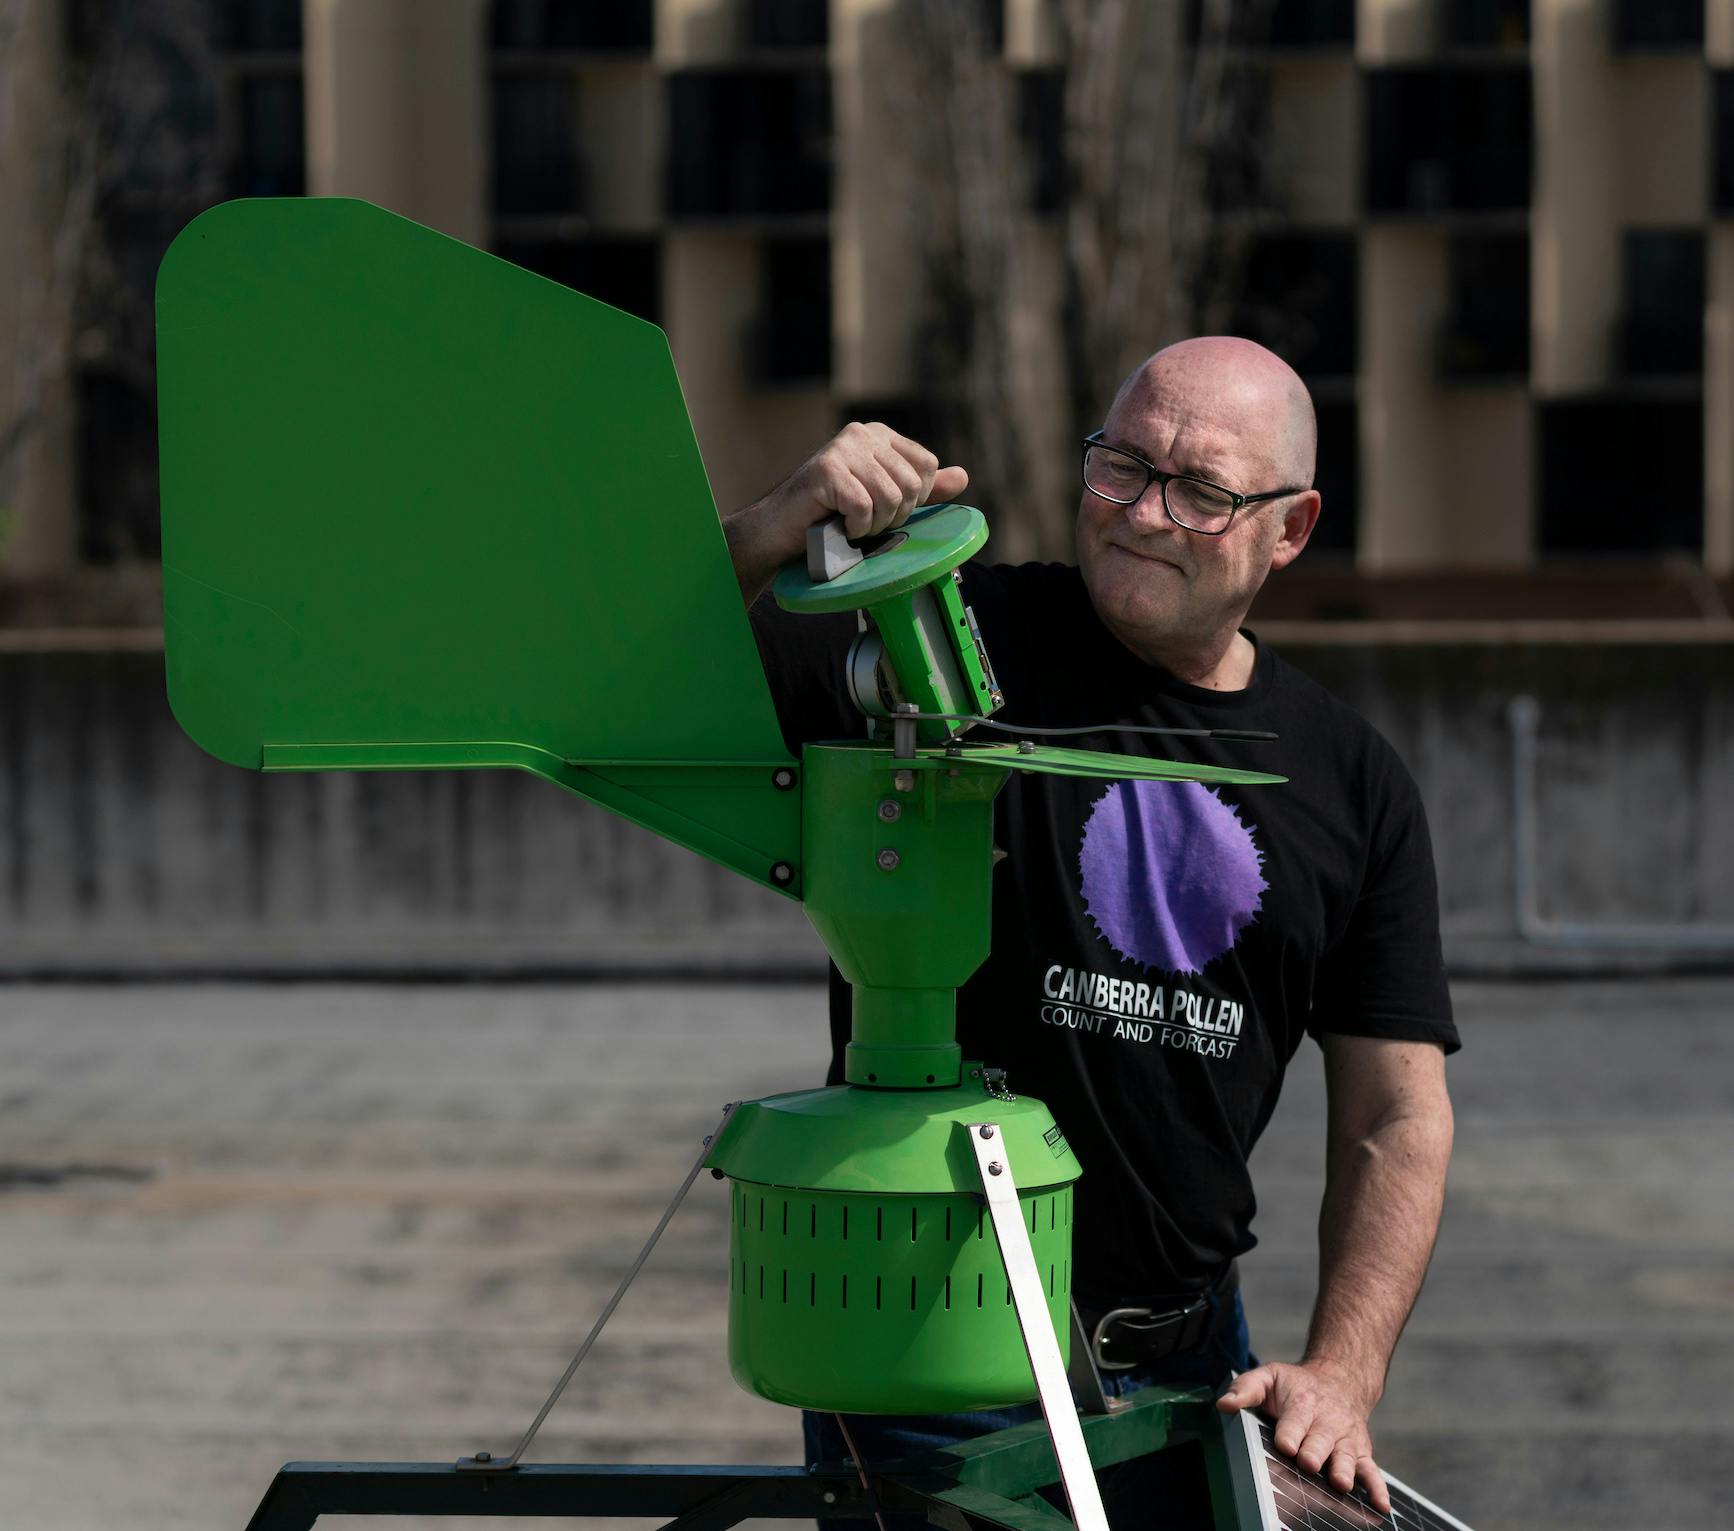 Simon Haberle pulls the top of a green metal machine, which is used to measure pollen.